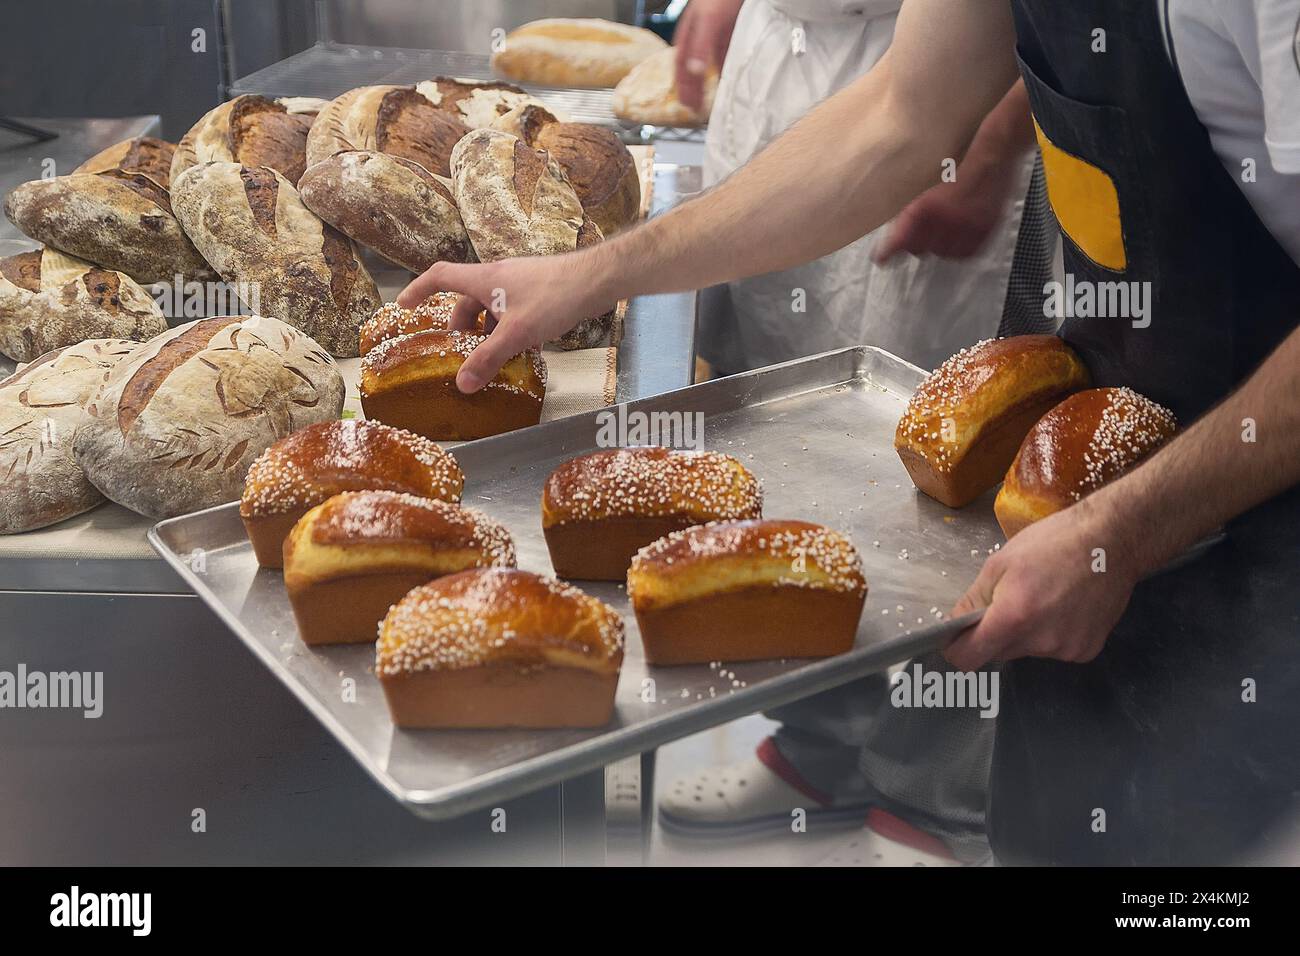 Baker in a bakery places fresh bread on a tray. Food Stock Photo